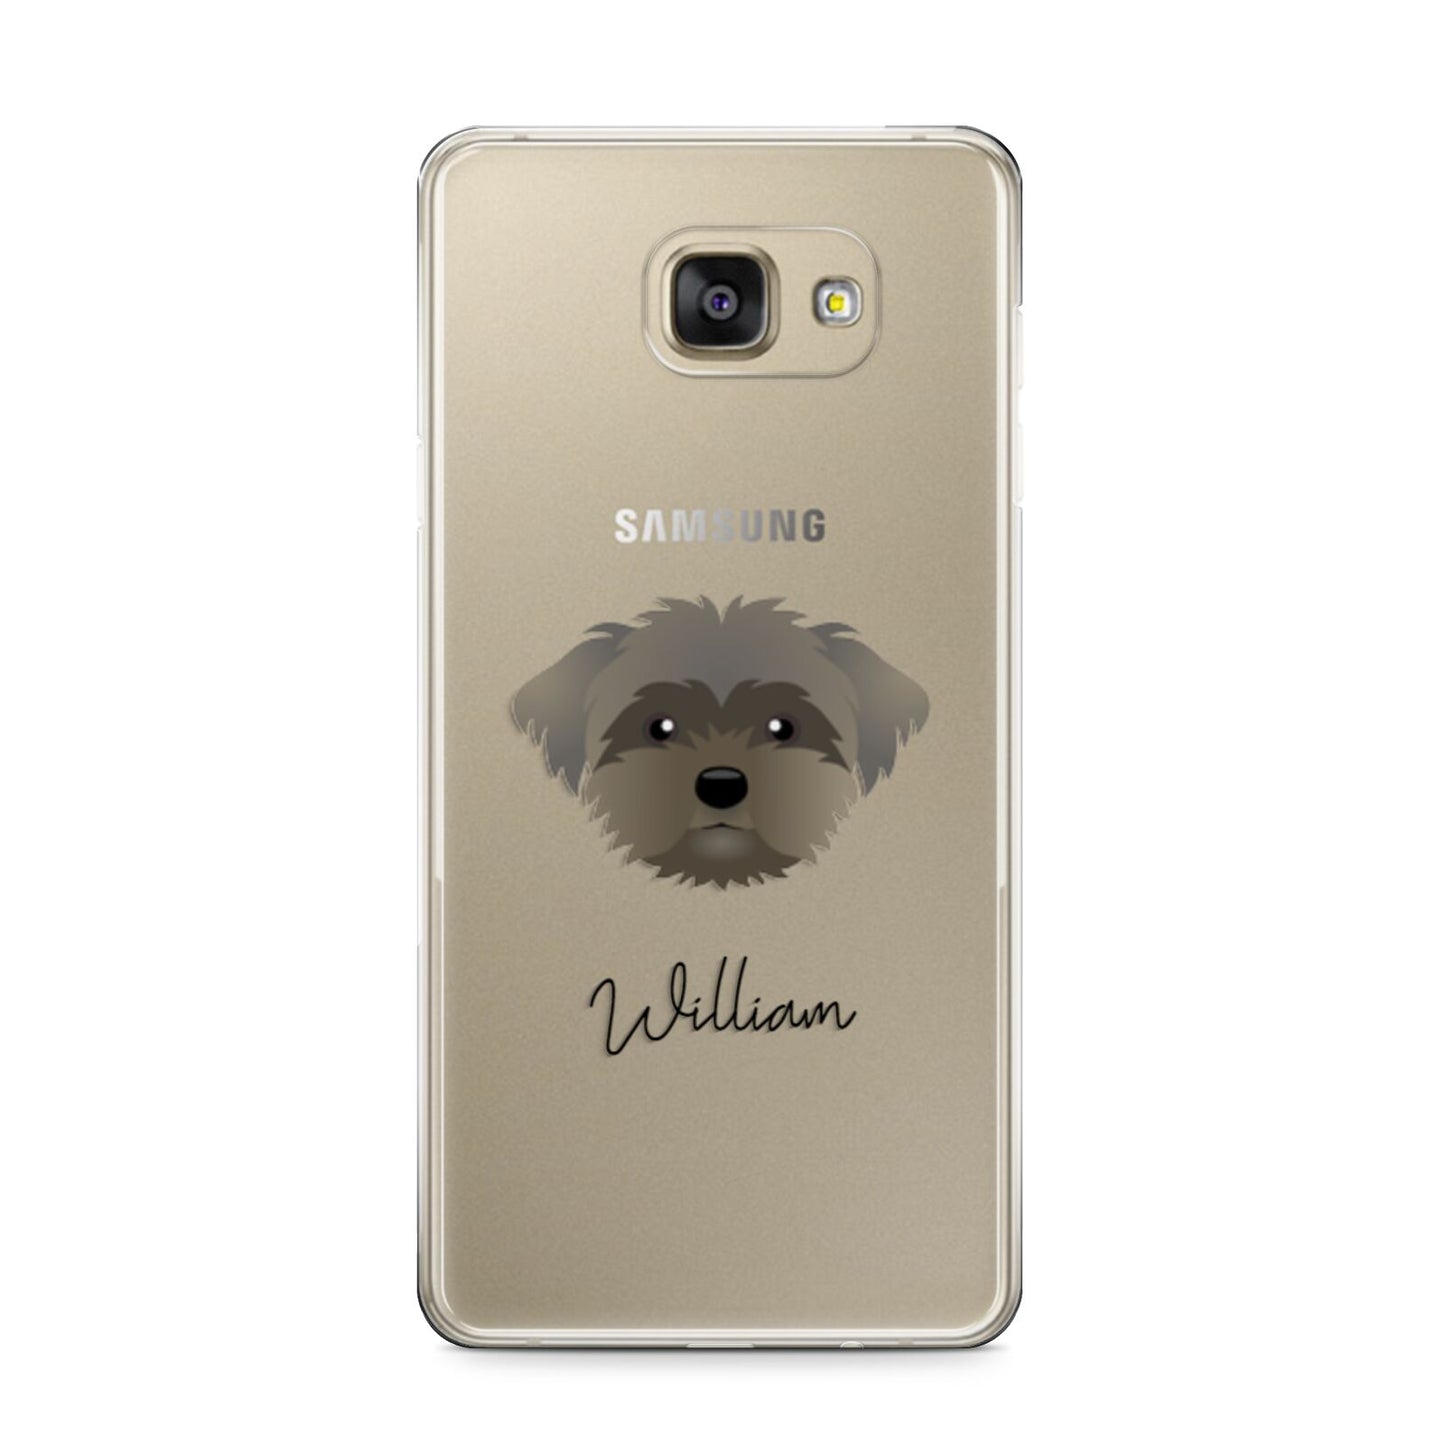 Peek a poo Personalised Samsung Galaxy A9 2016 Case on gold phone